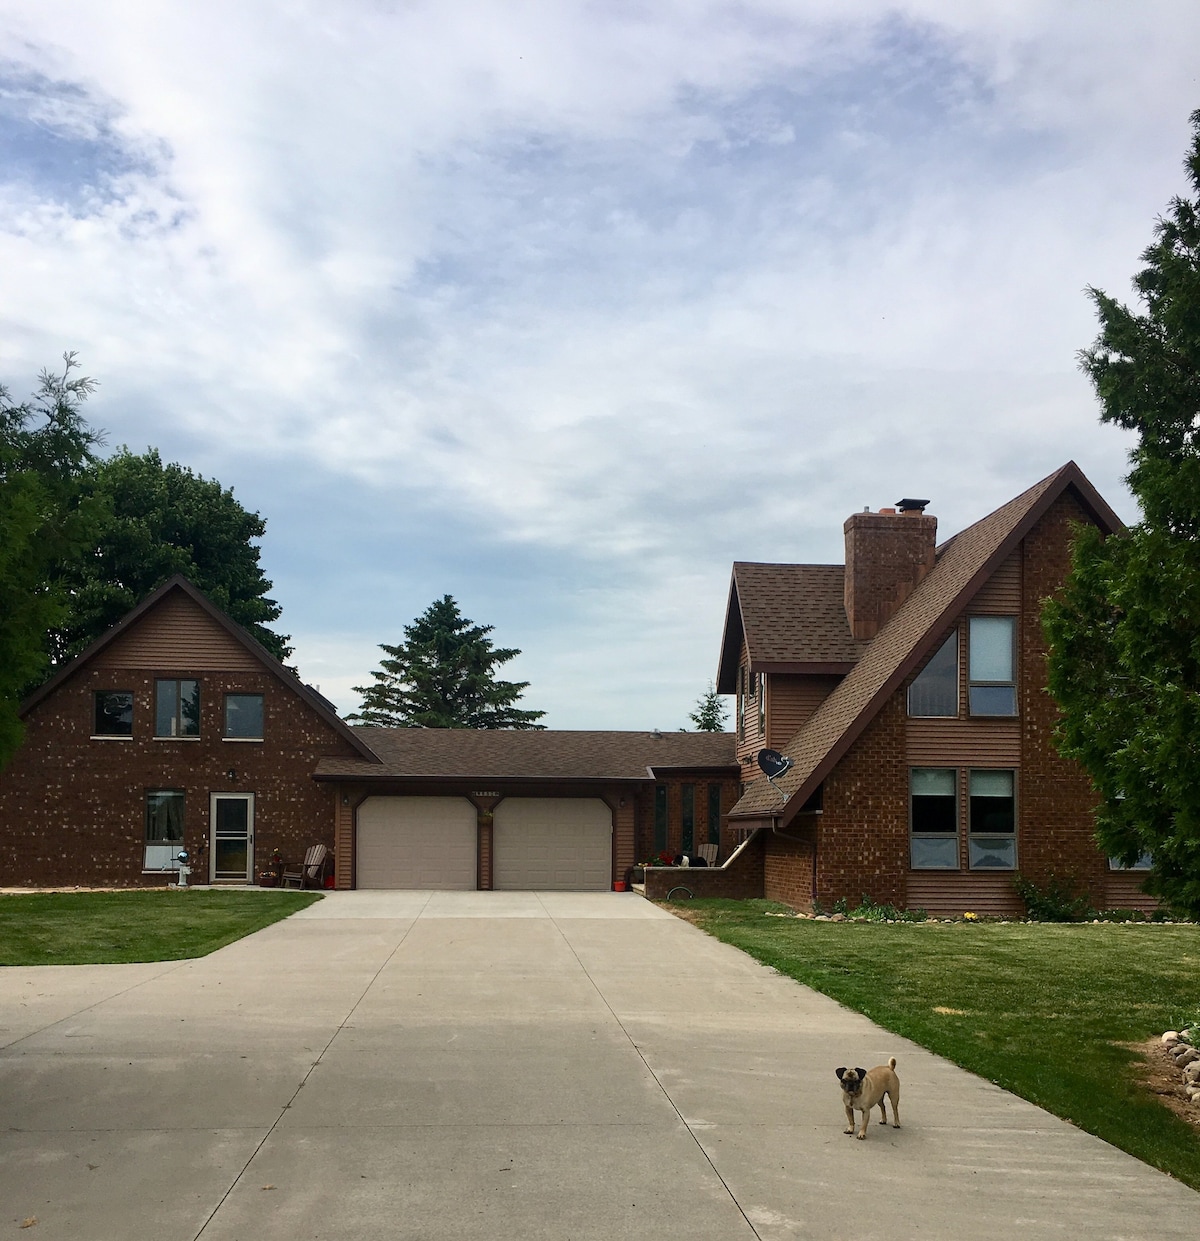 Our Charming Country Home [11 mi. to Lambeau]